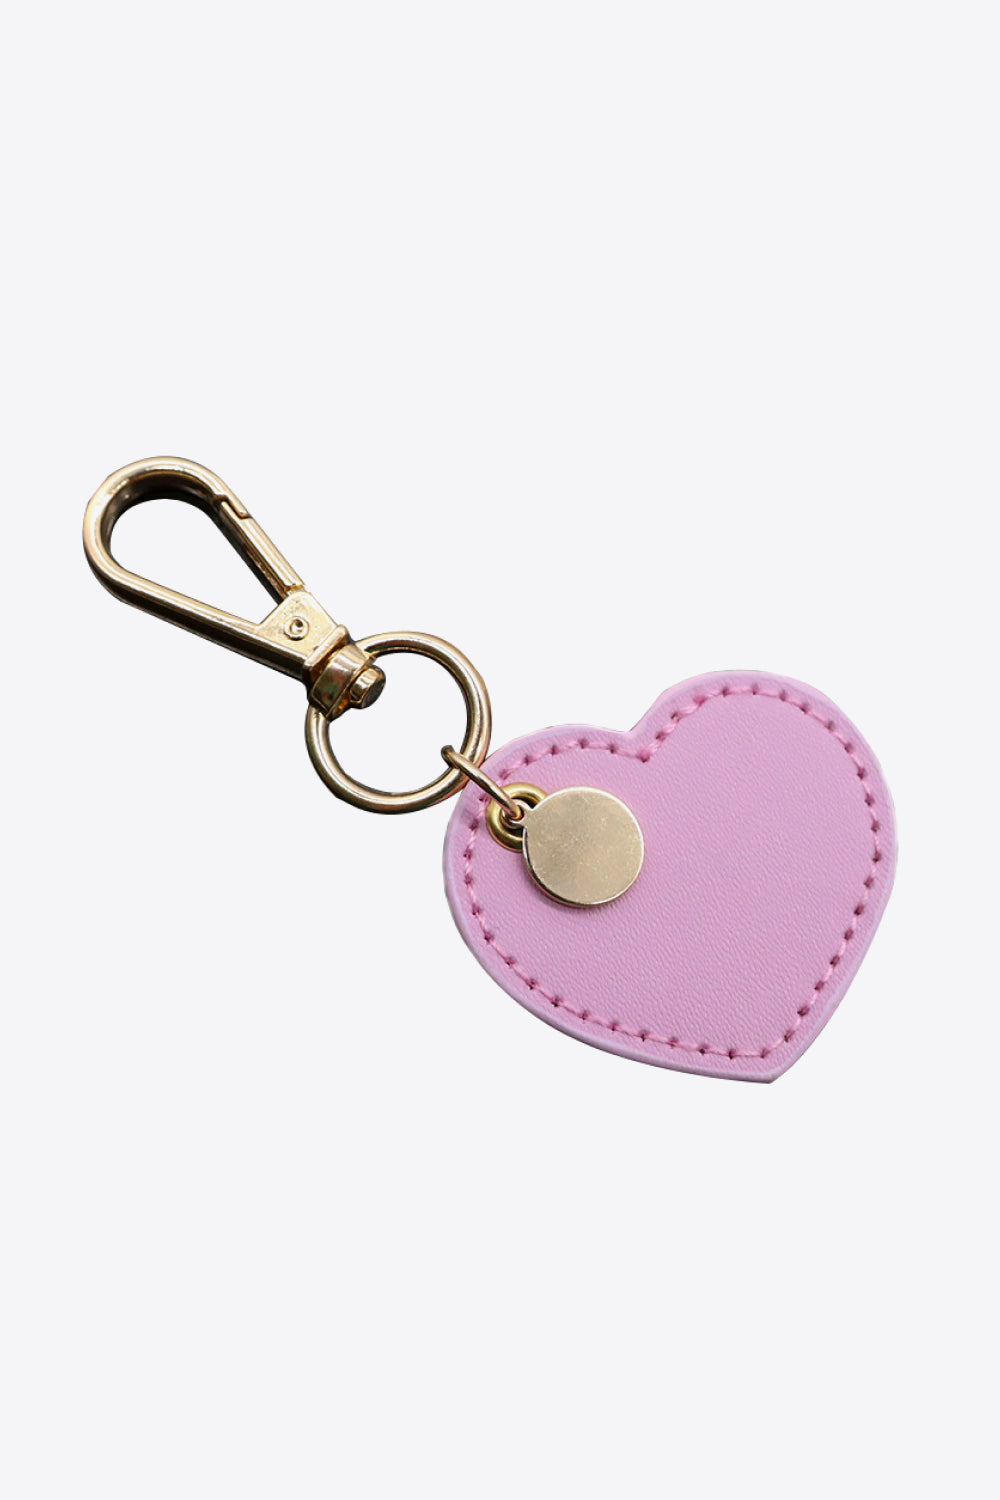 Trendsi Cupid Beauty Supplies Pink Lavender / One Size Keychains Assorted 4-Pack Heart Shape PU Leather Keychain